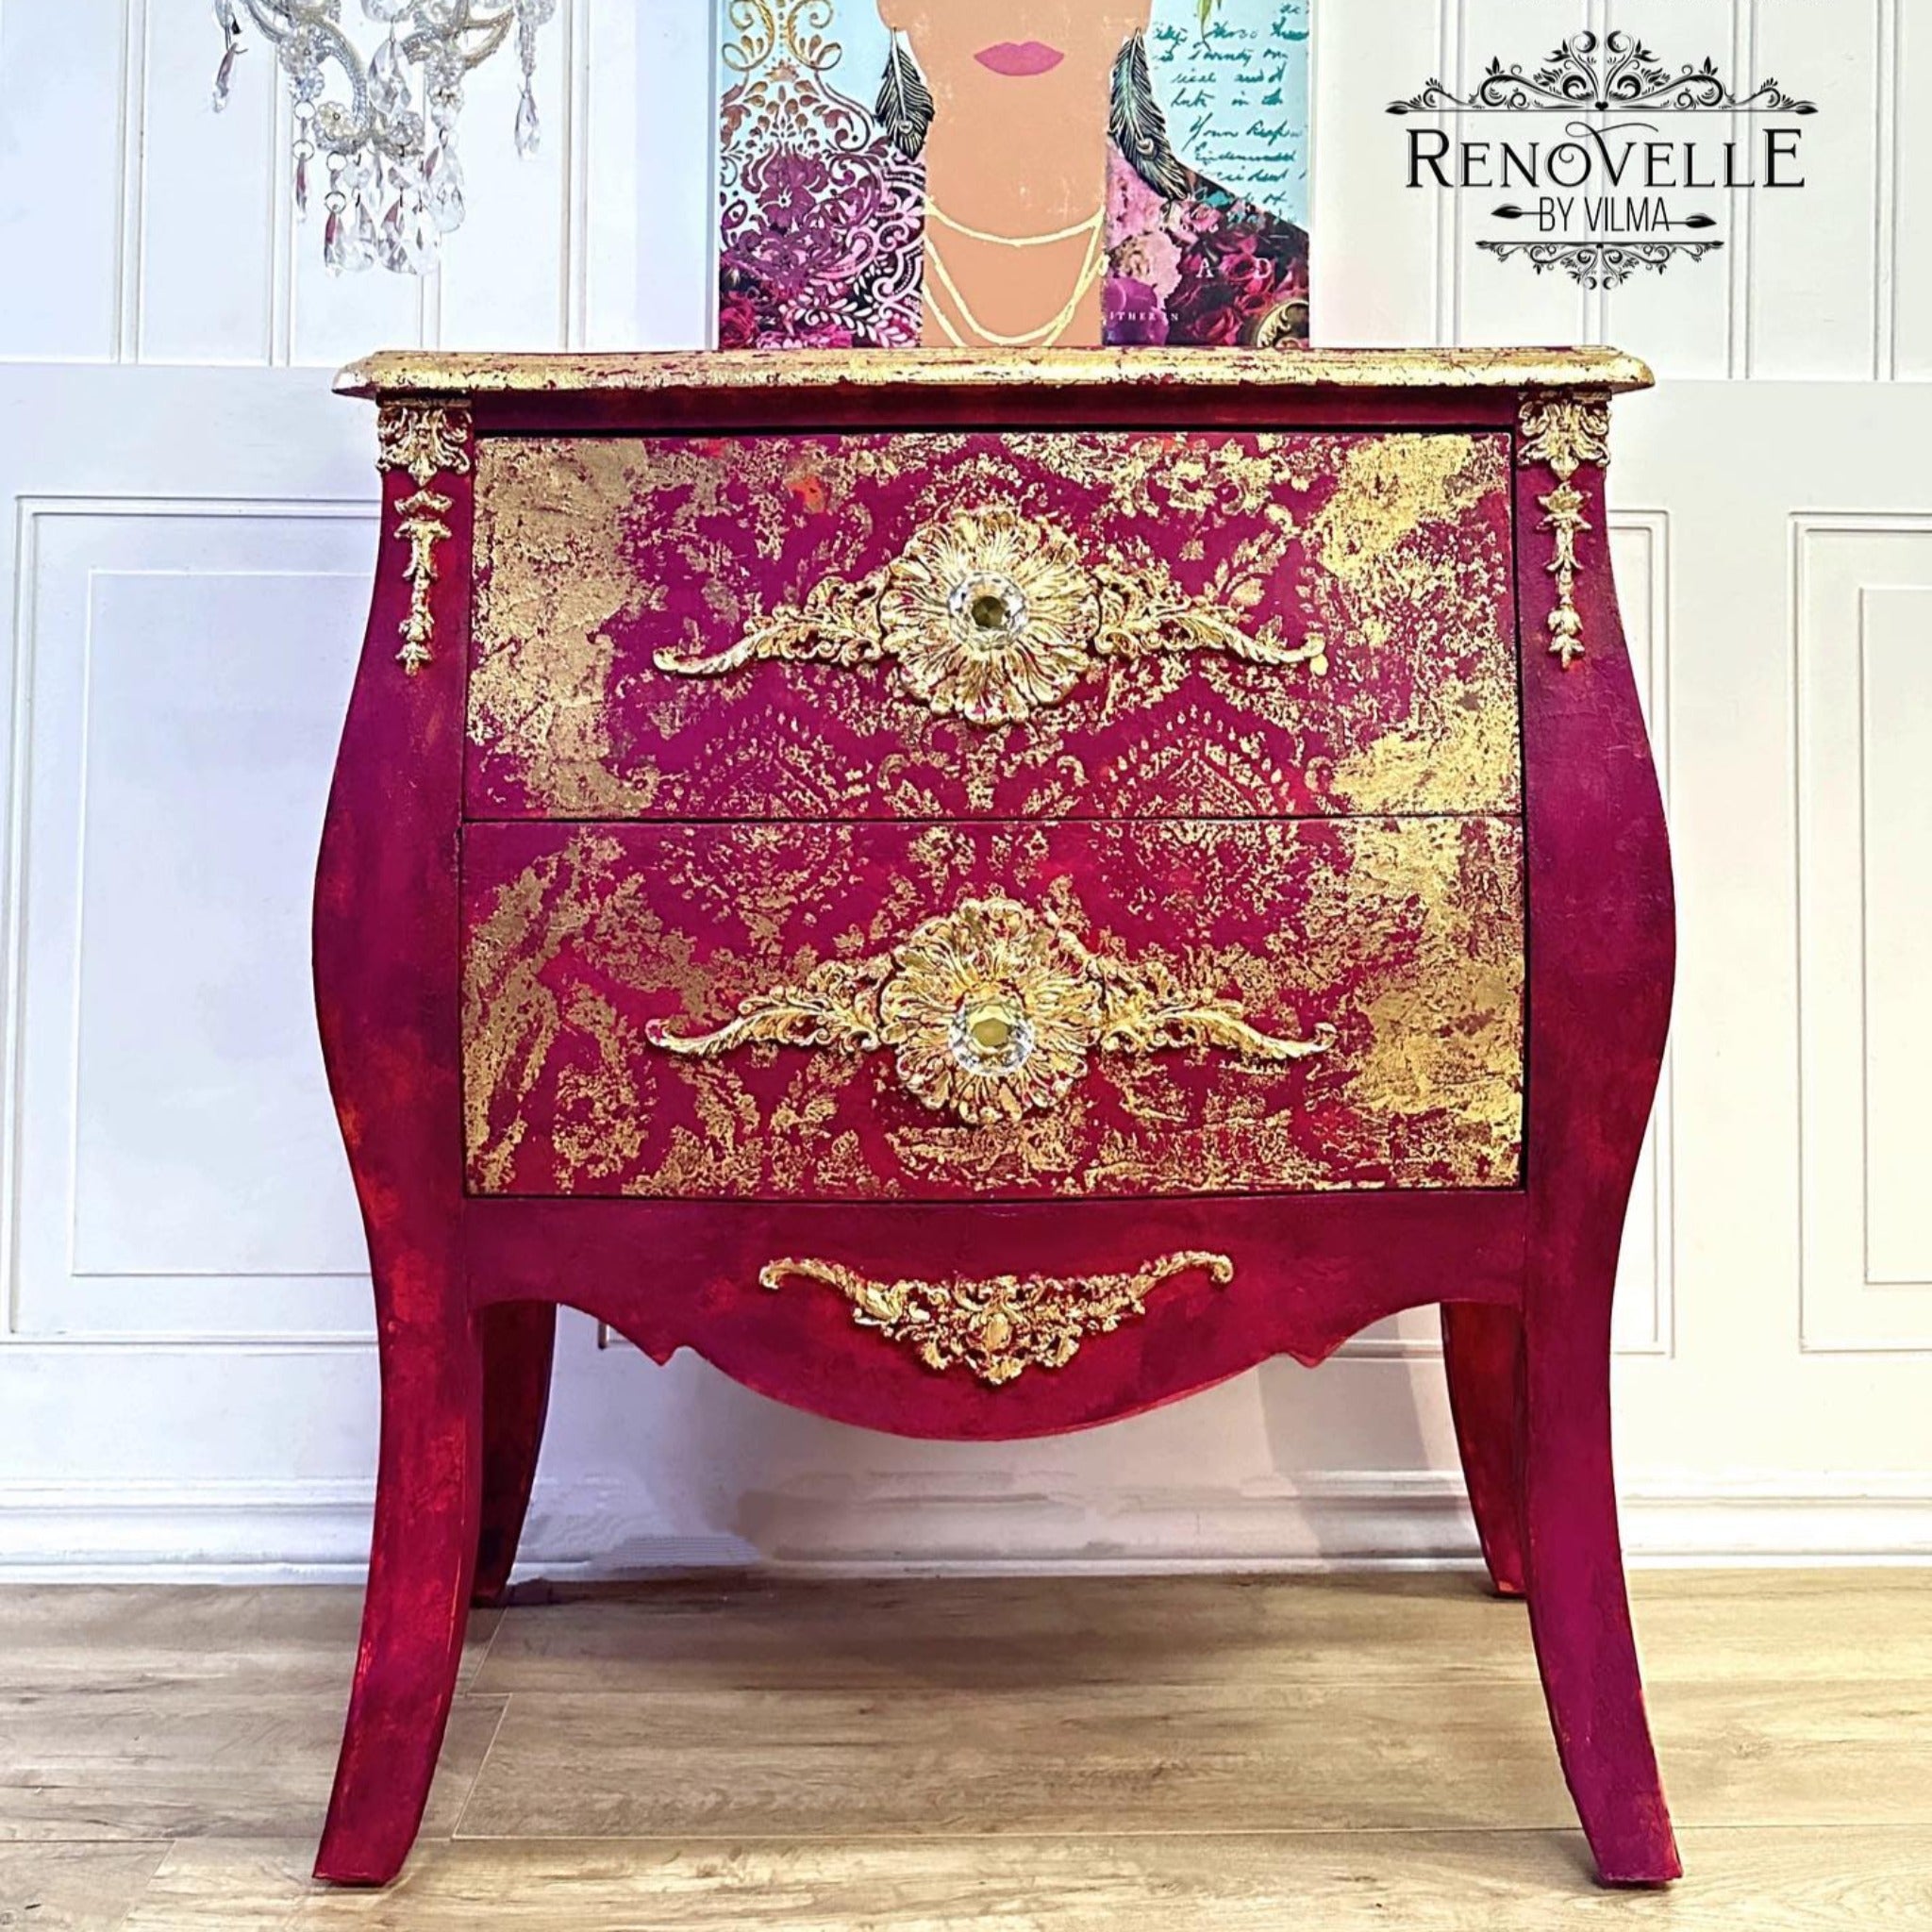 A vintage Bombay style dresser refurbished by Renovelle by Vilma is painted dark red with gold accents and features a piece of ReDesign with Prima's Golden Emblem on the front top left and right side.